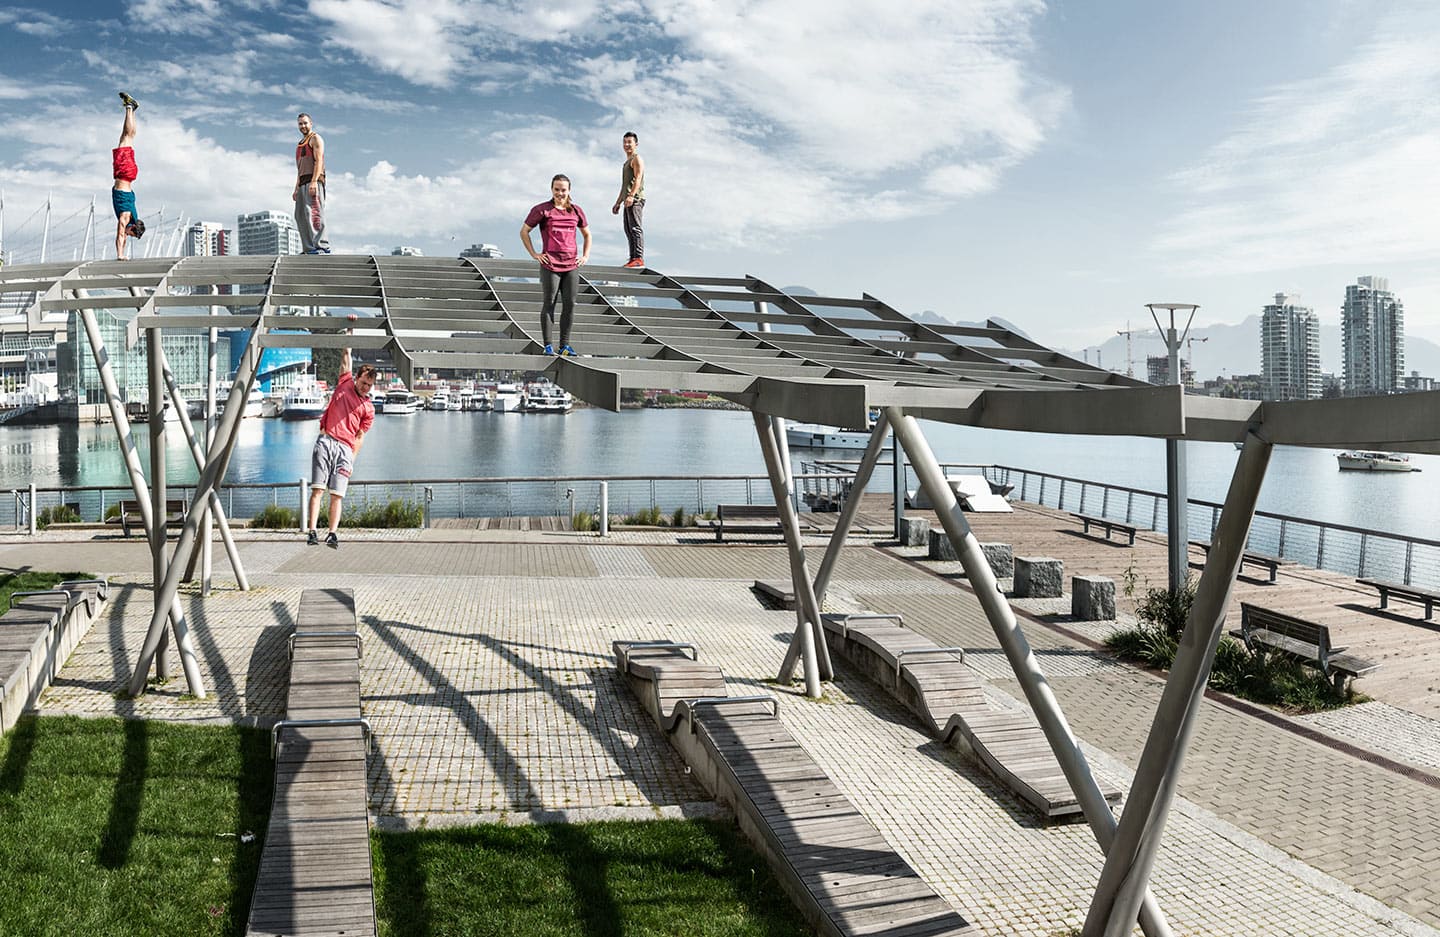 Parkour Athletes Pose for Image at Park on Scaffolding Bright Skies Handstand